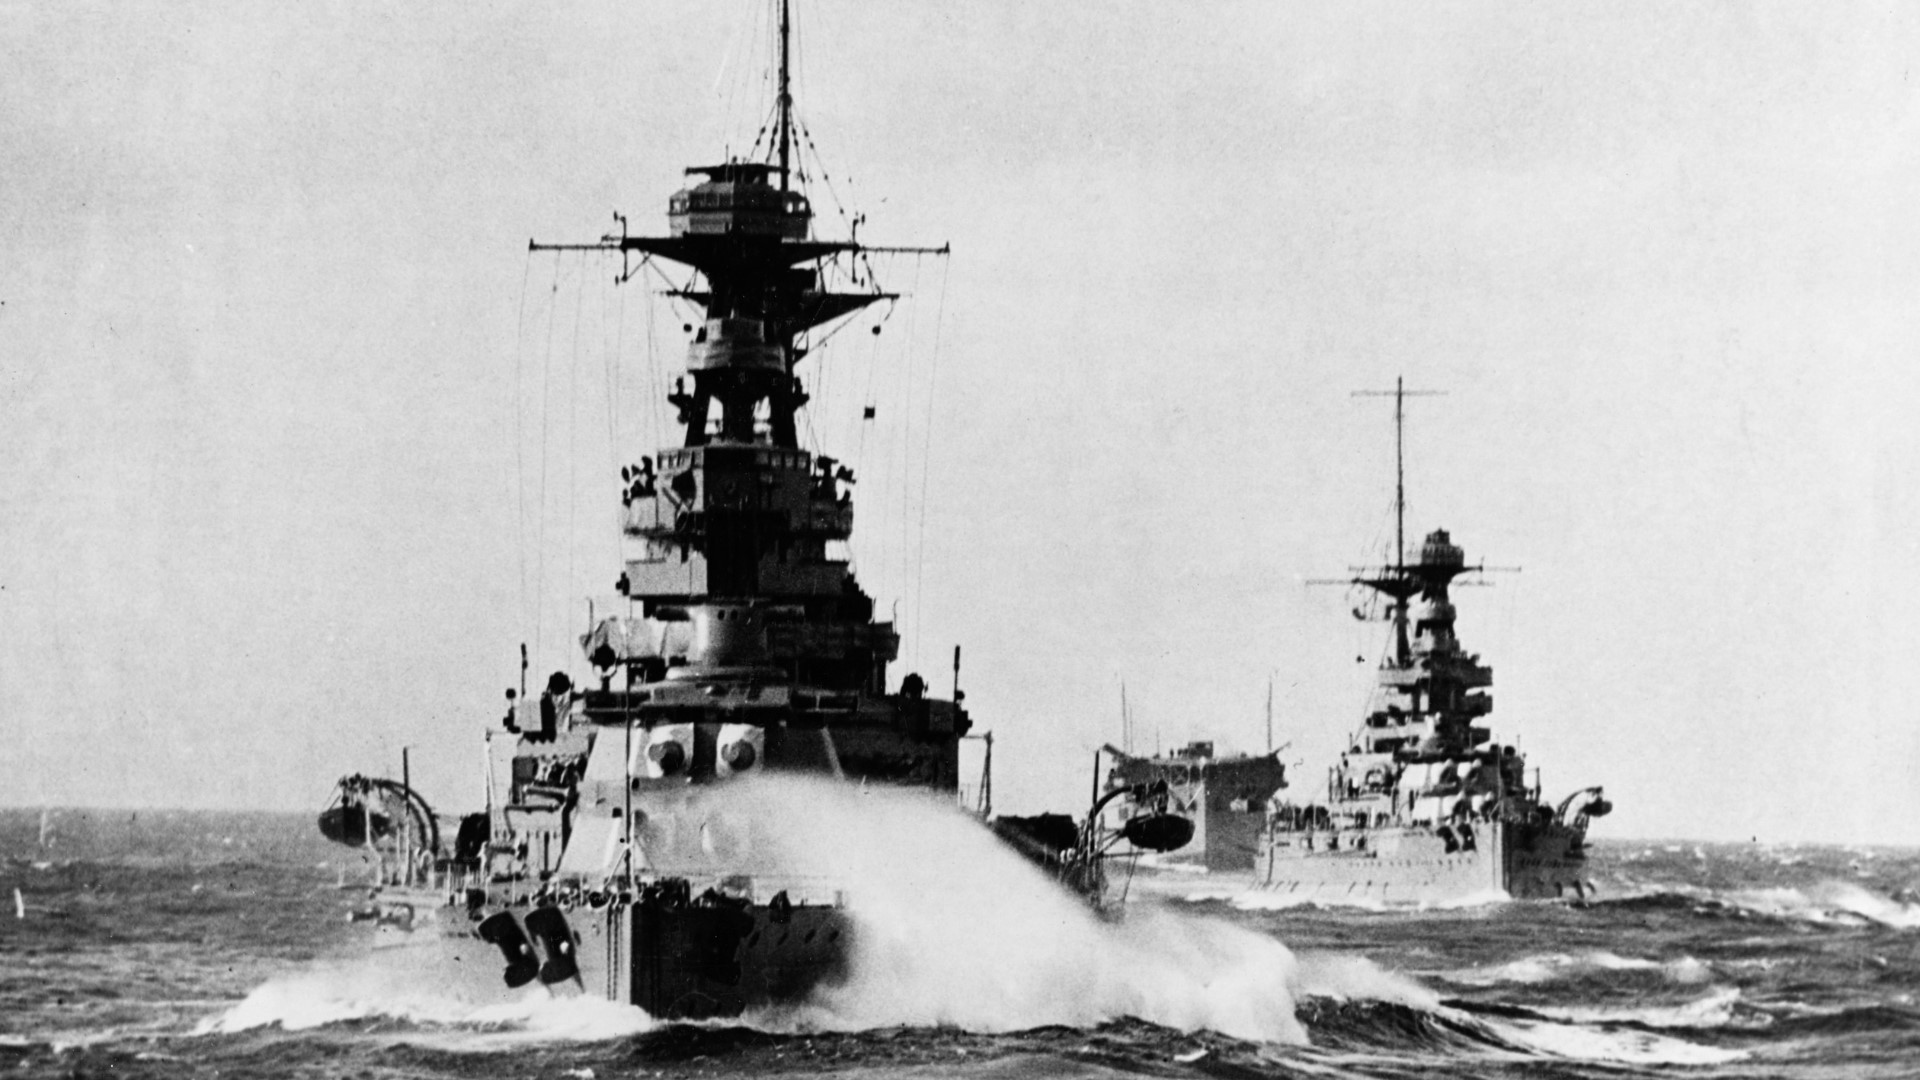 A World War II military ship moving across a body of water, another ship behind it. 